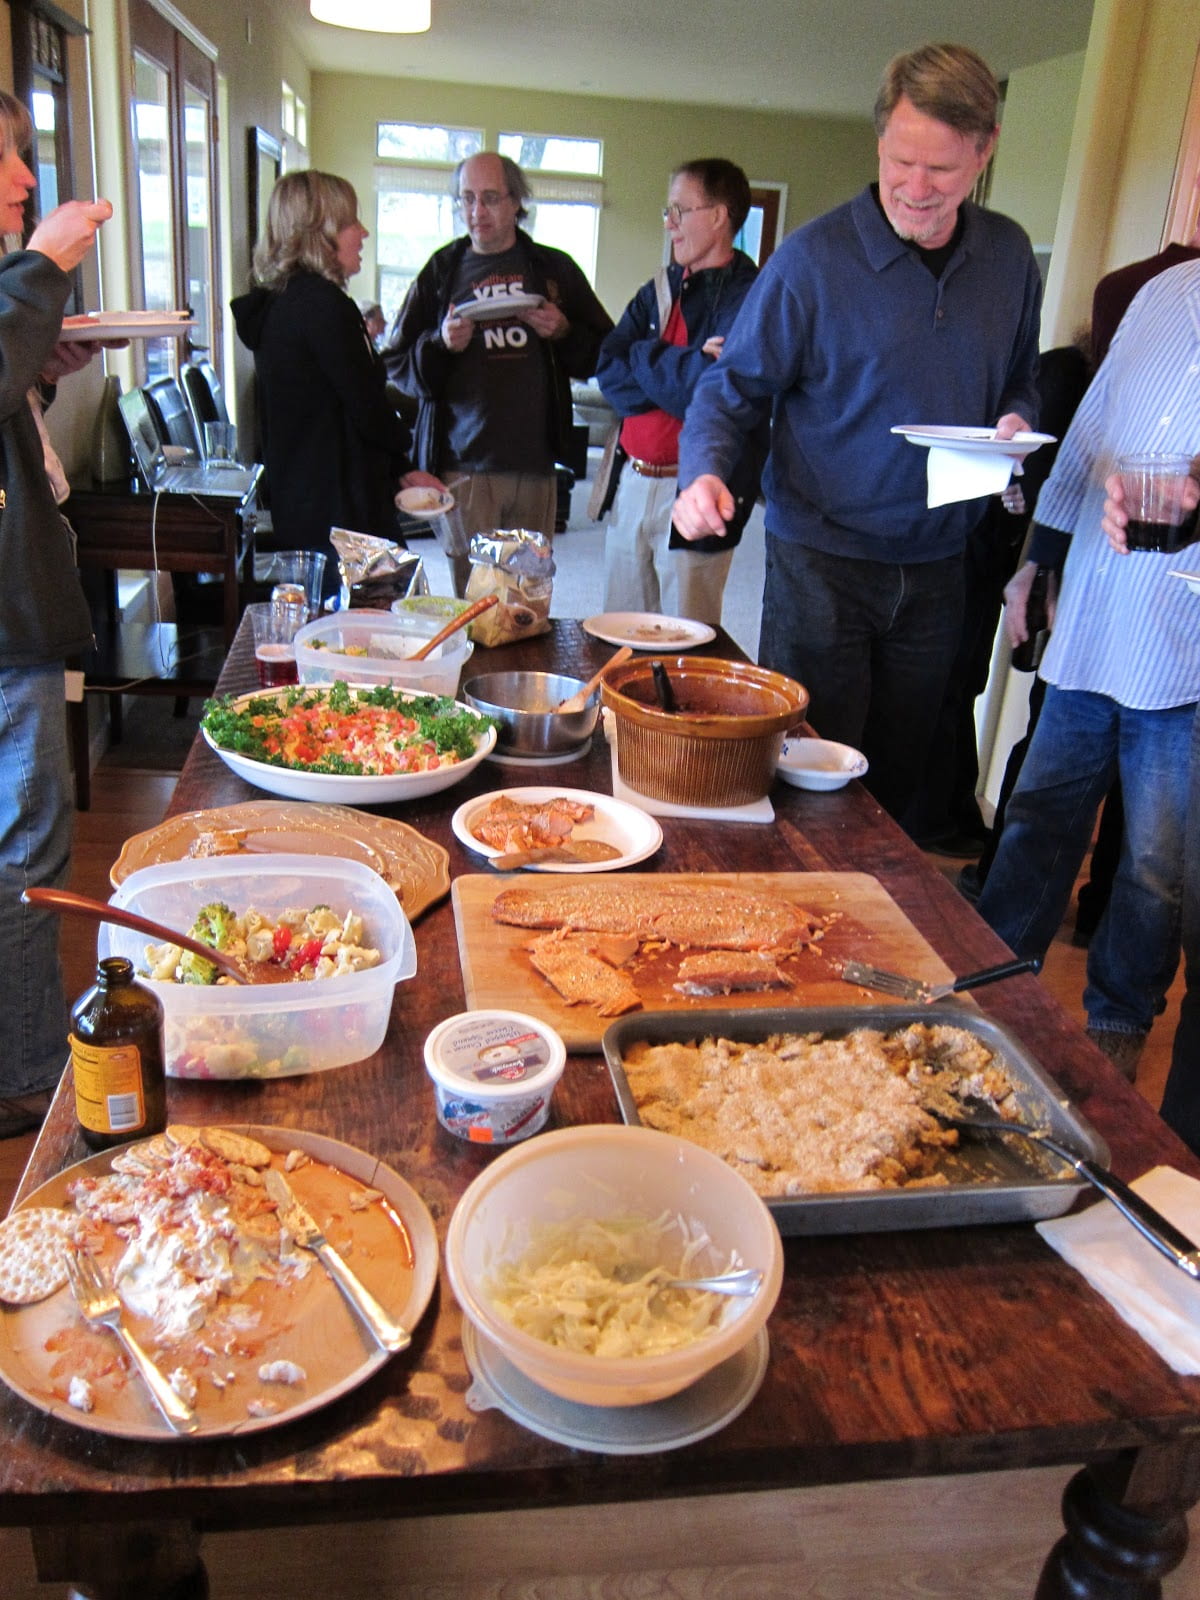 A group of people enjoying a potluck gathering.